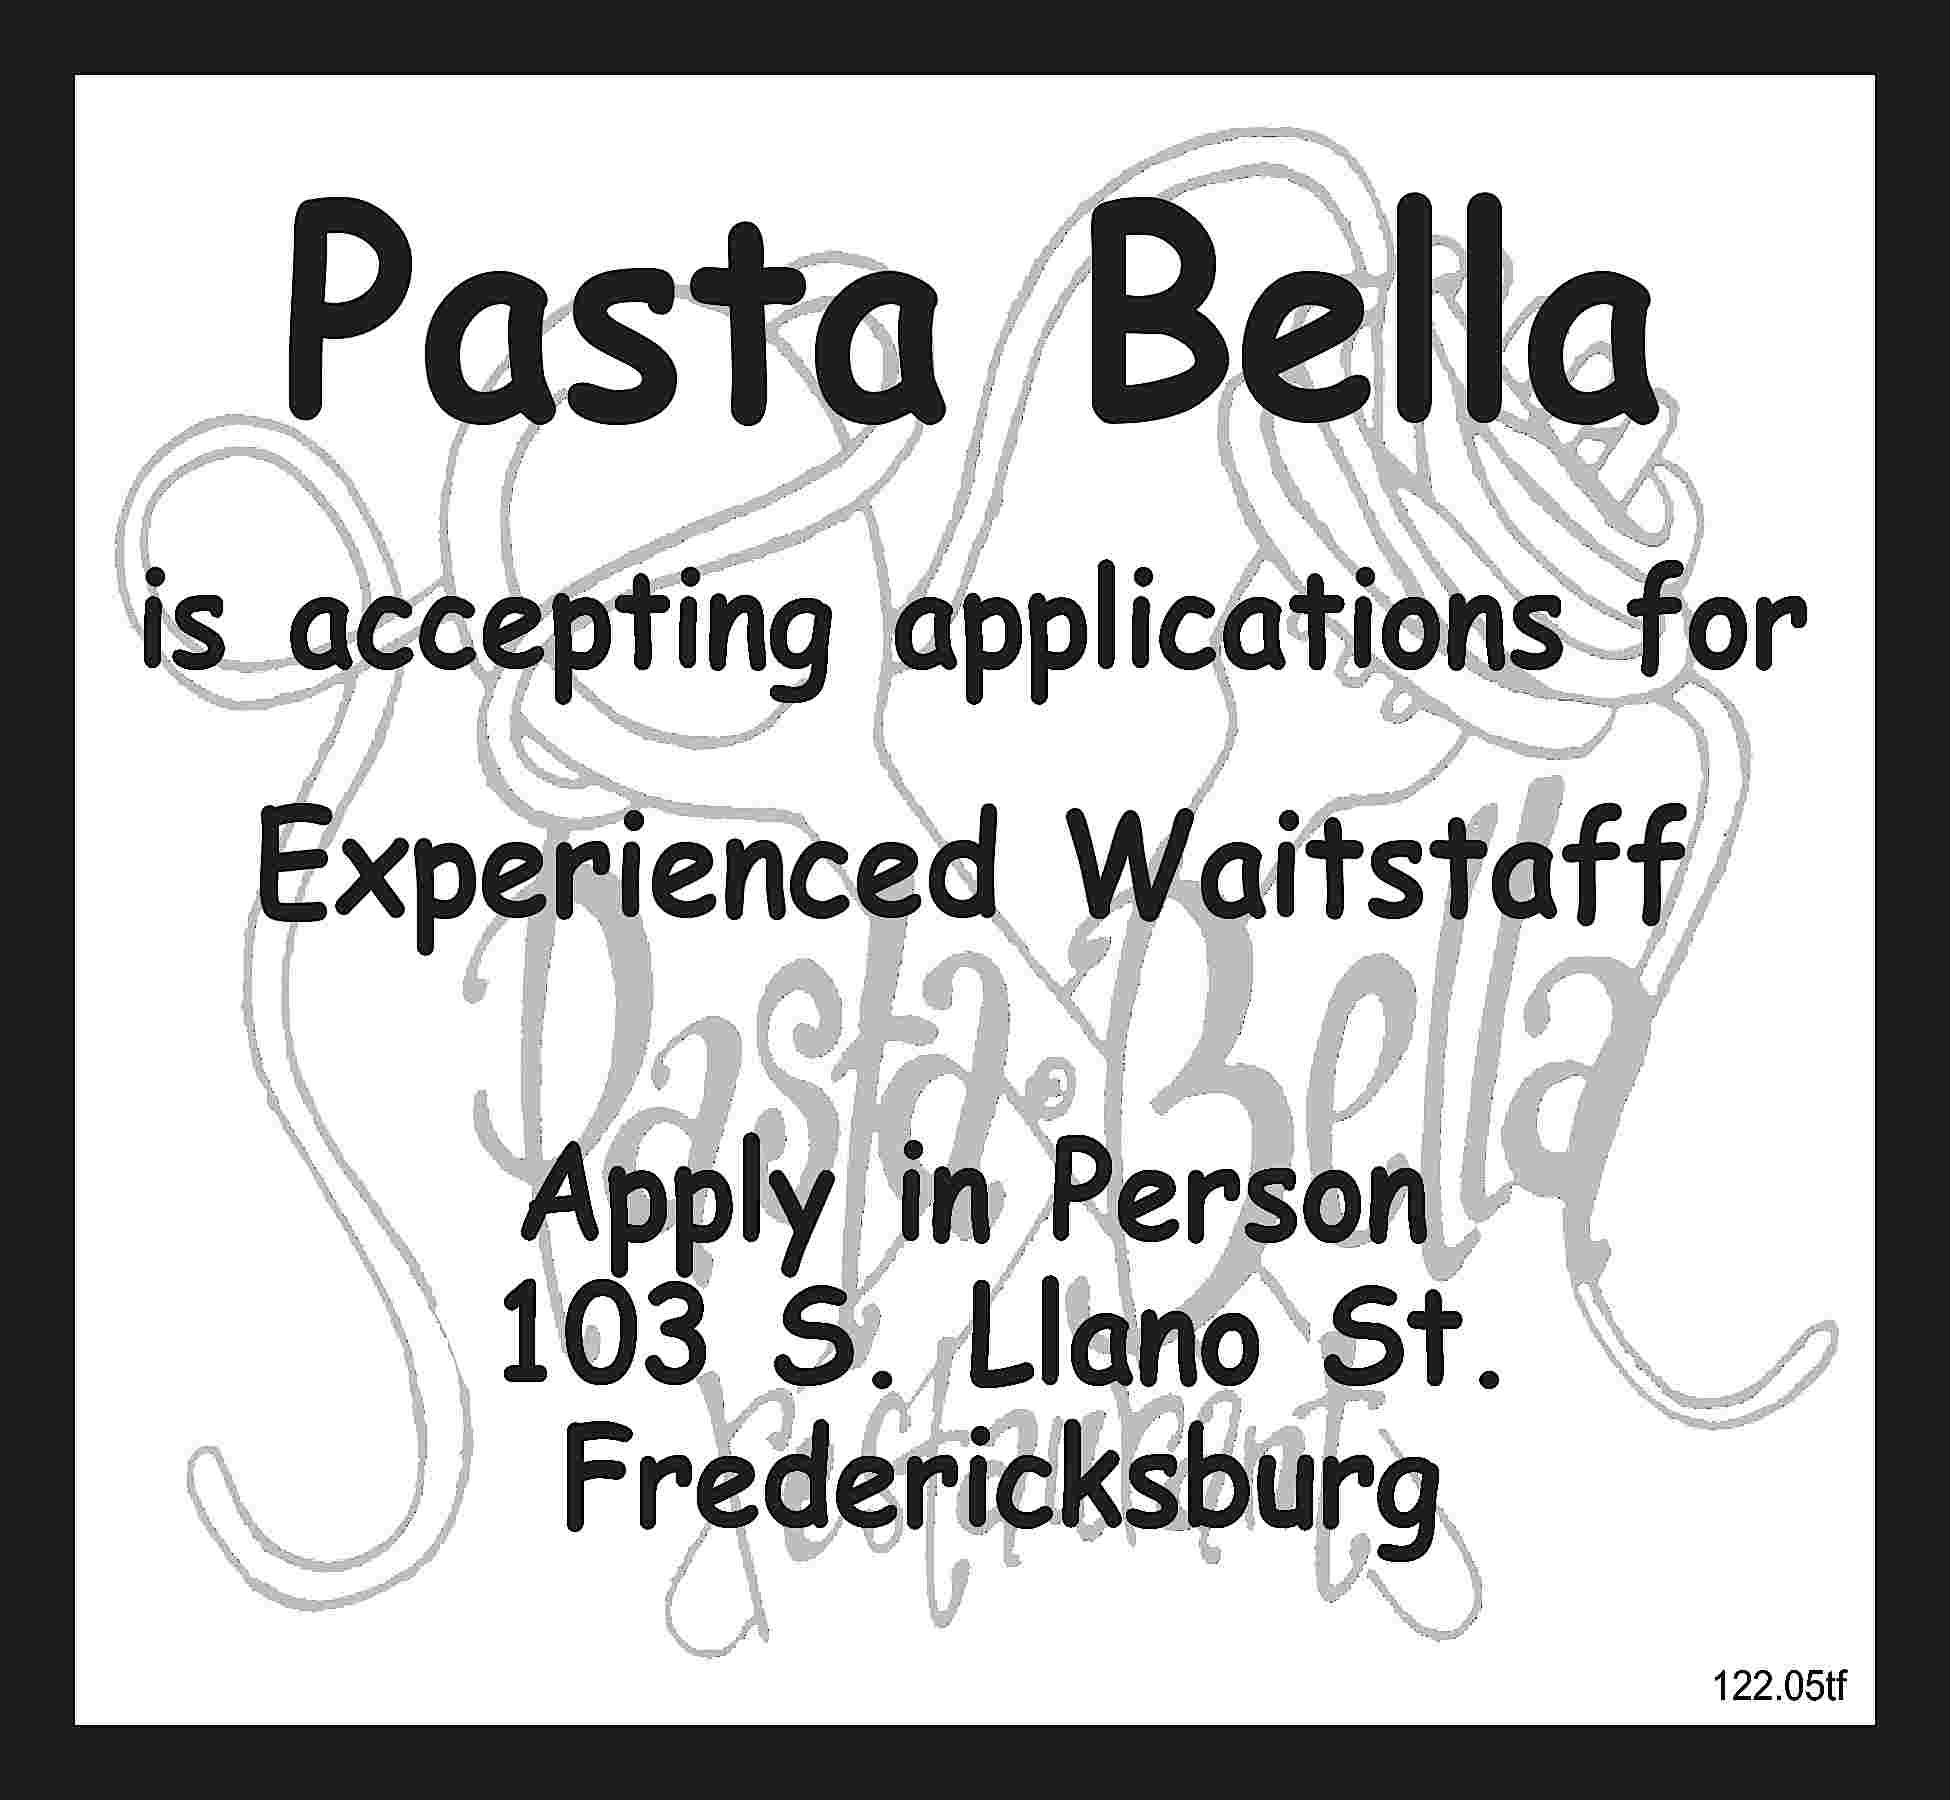 Pasta Bella is accepting applications  Pasta Bella is accepting applications for Experienced Waitstaff Apply in Person  103 S. Llano St. Fredericksburg 122.05tf